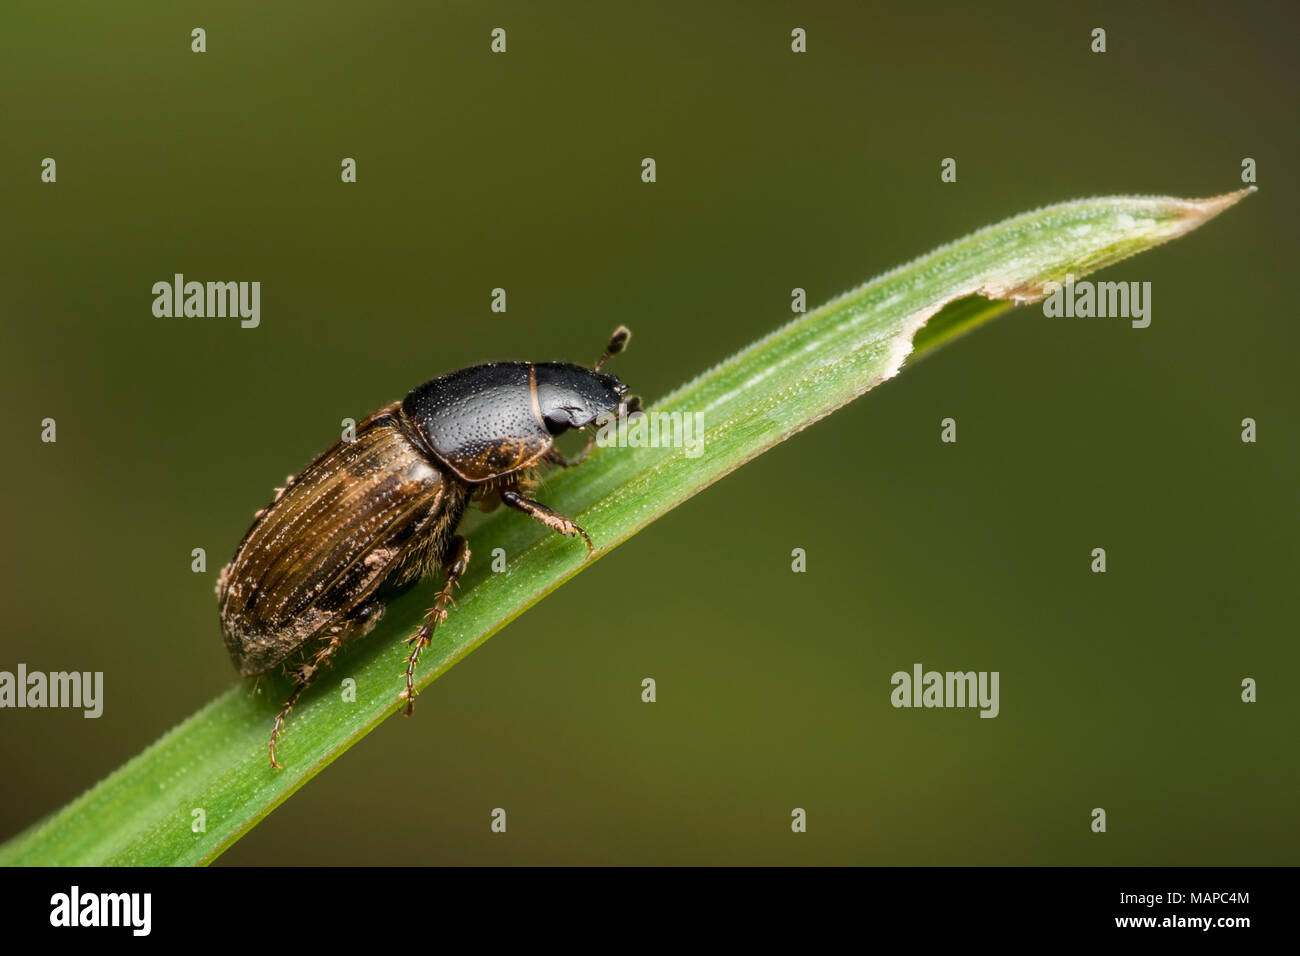 Dung beetle (Aphodius sp.) perched near the top of a blade of grass. Tipperary, Ireland Stock Photo